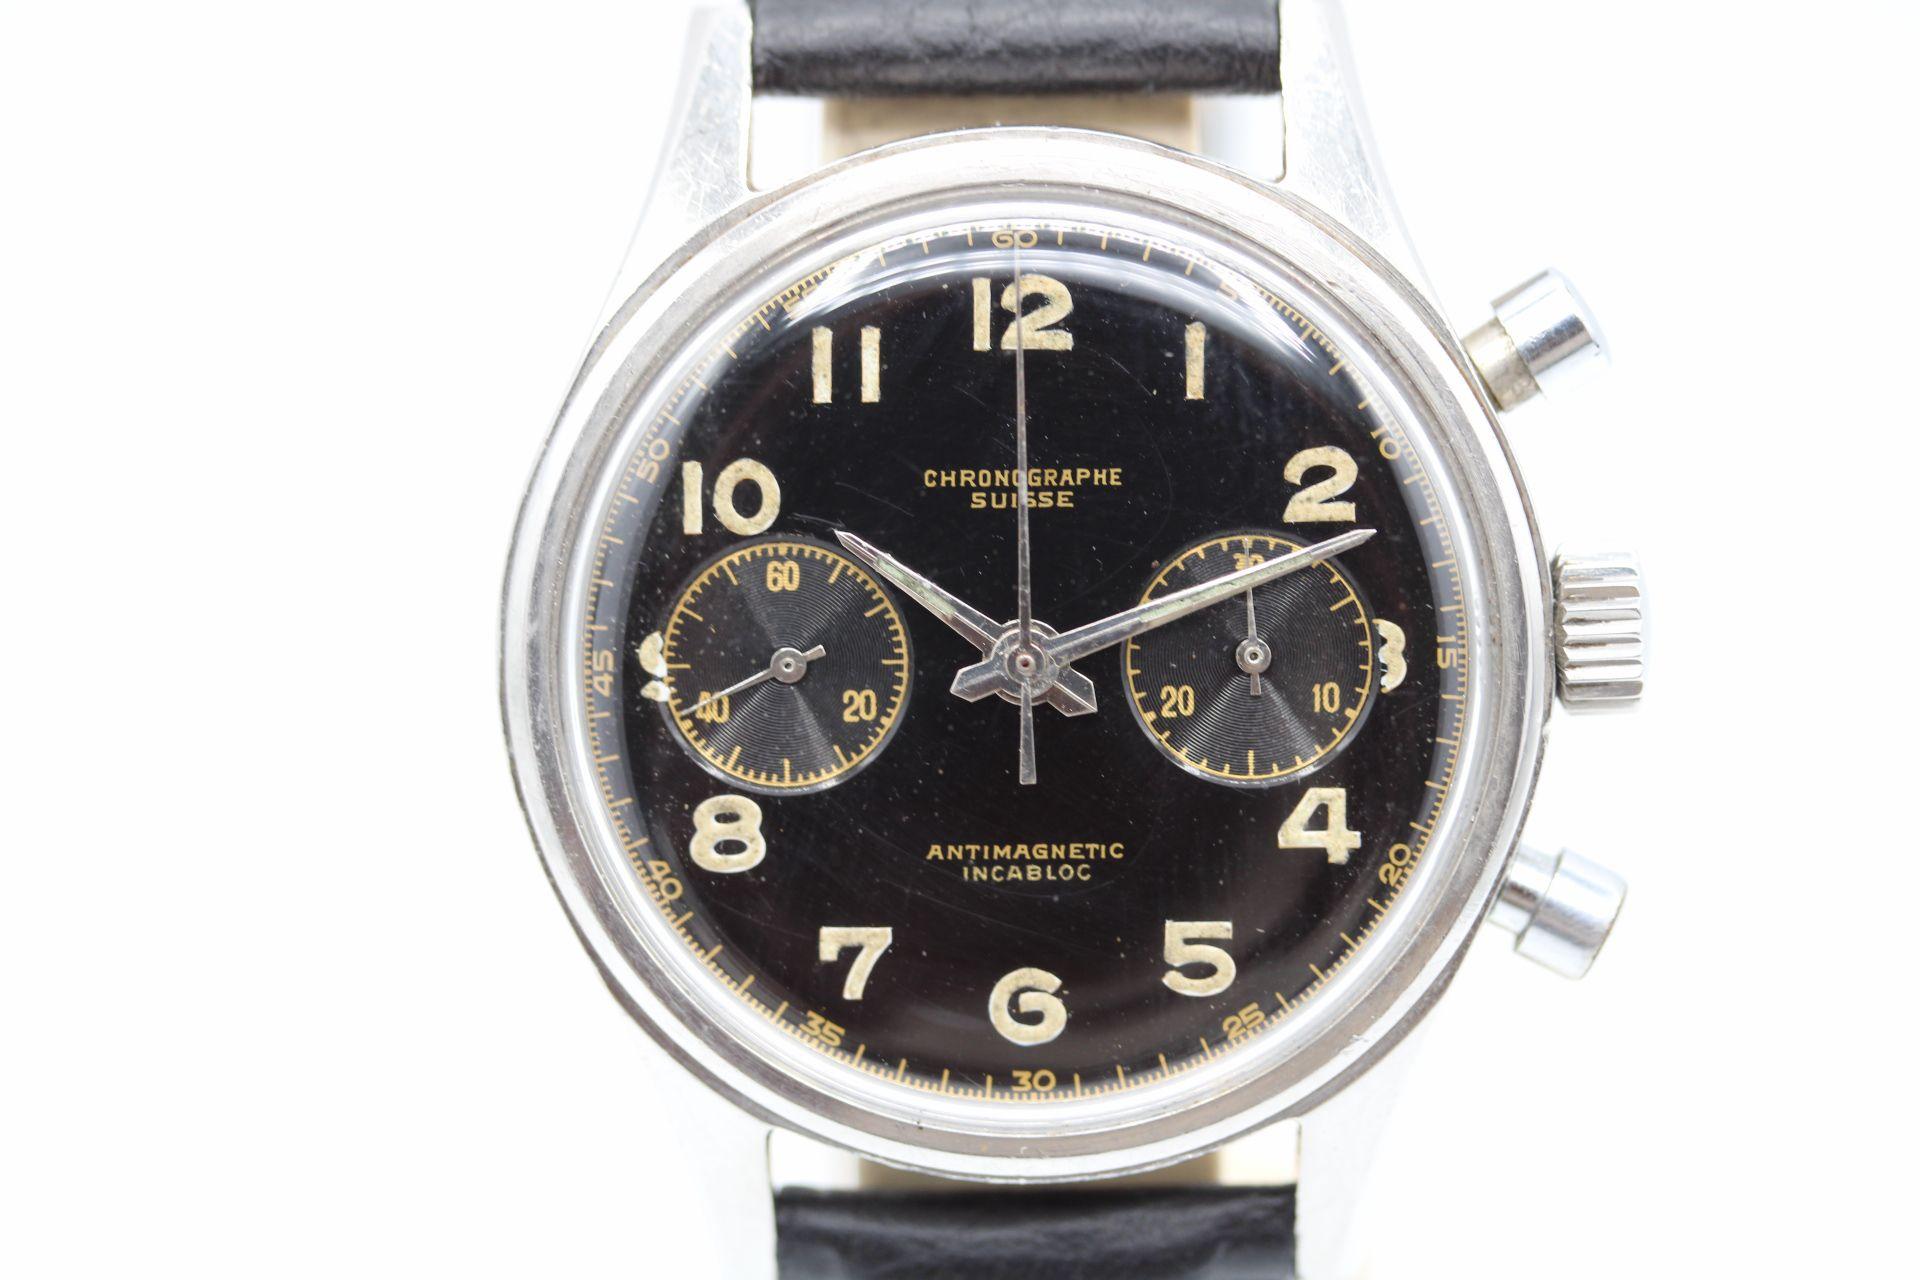 A rare find! This is a special watch even more so in such condition.

This Chronographe Suisse is one of the first waterproof Chronographs of the time in fact it used a patented case type to ensure that the watch remained waterproof despite many of